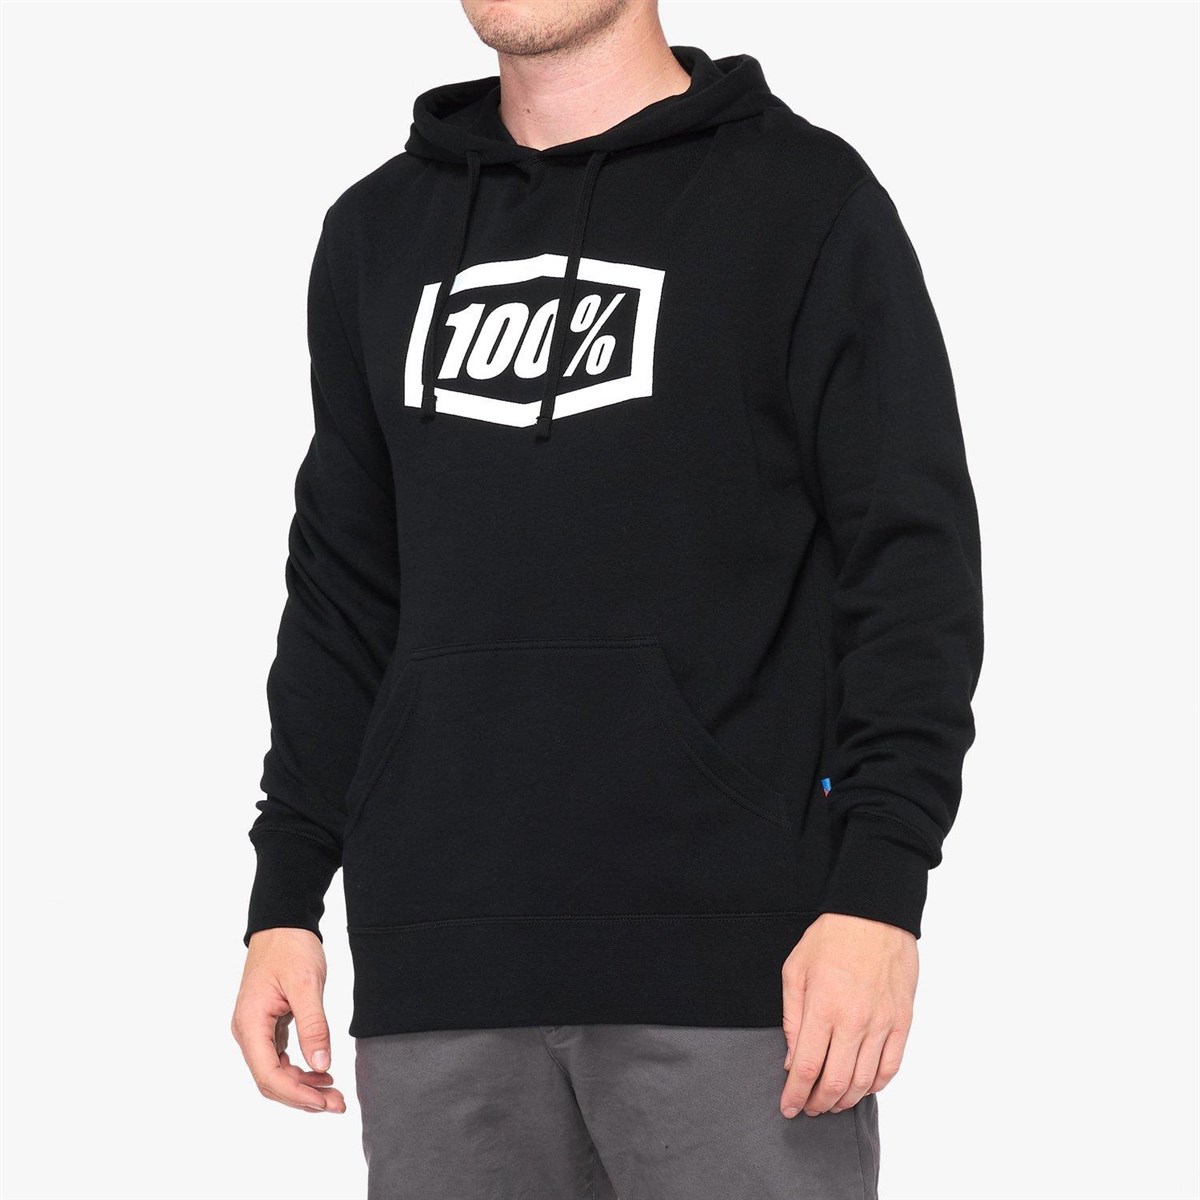 100% Essential Pullover Hoodie product image